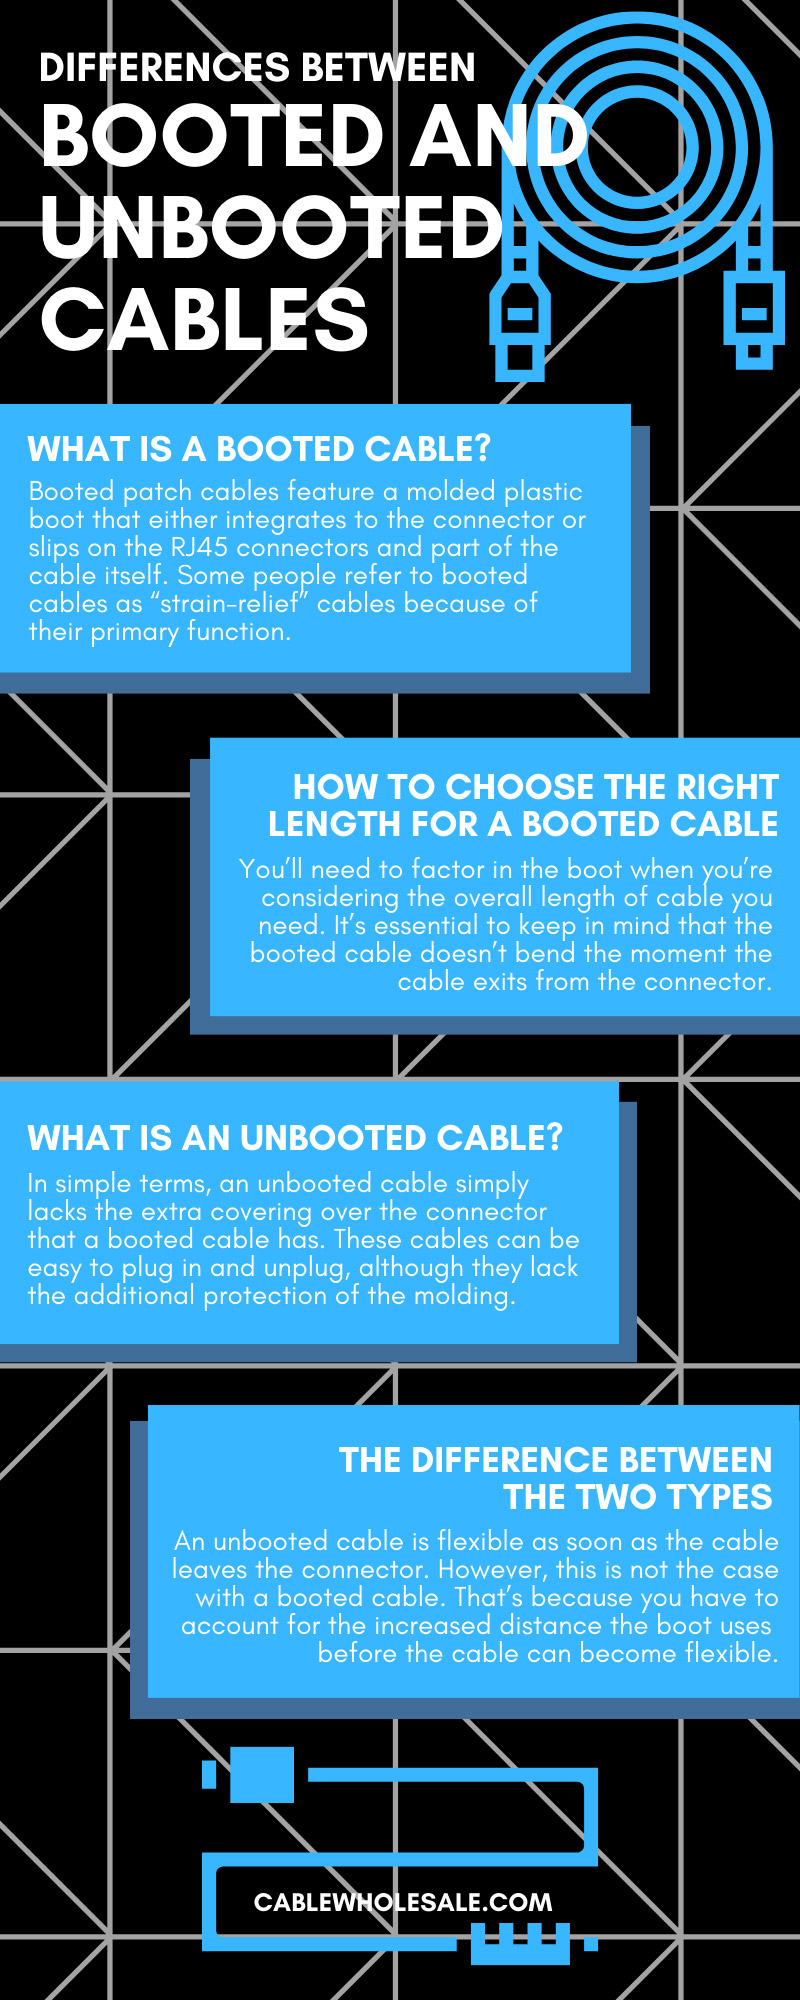 Differences Between Booted and Unbooted Cables